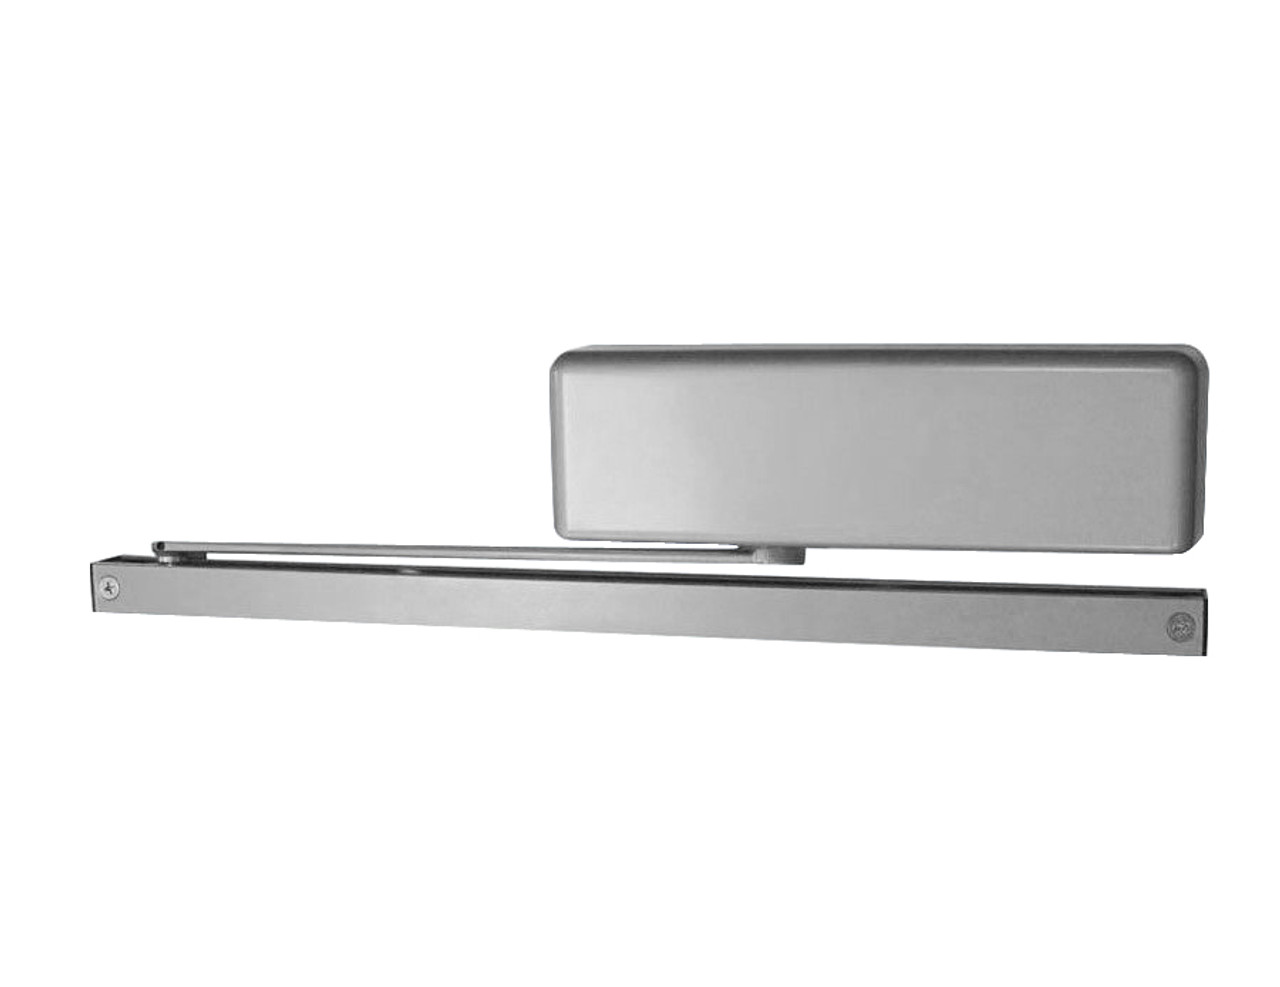 4021T-H-BUMPER-RH-US26D LCN Door Closer Hold Open Track with Bumper in Satin Chrome Finish